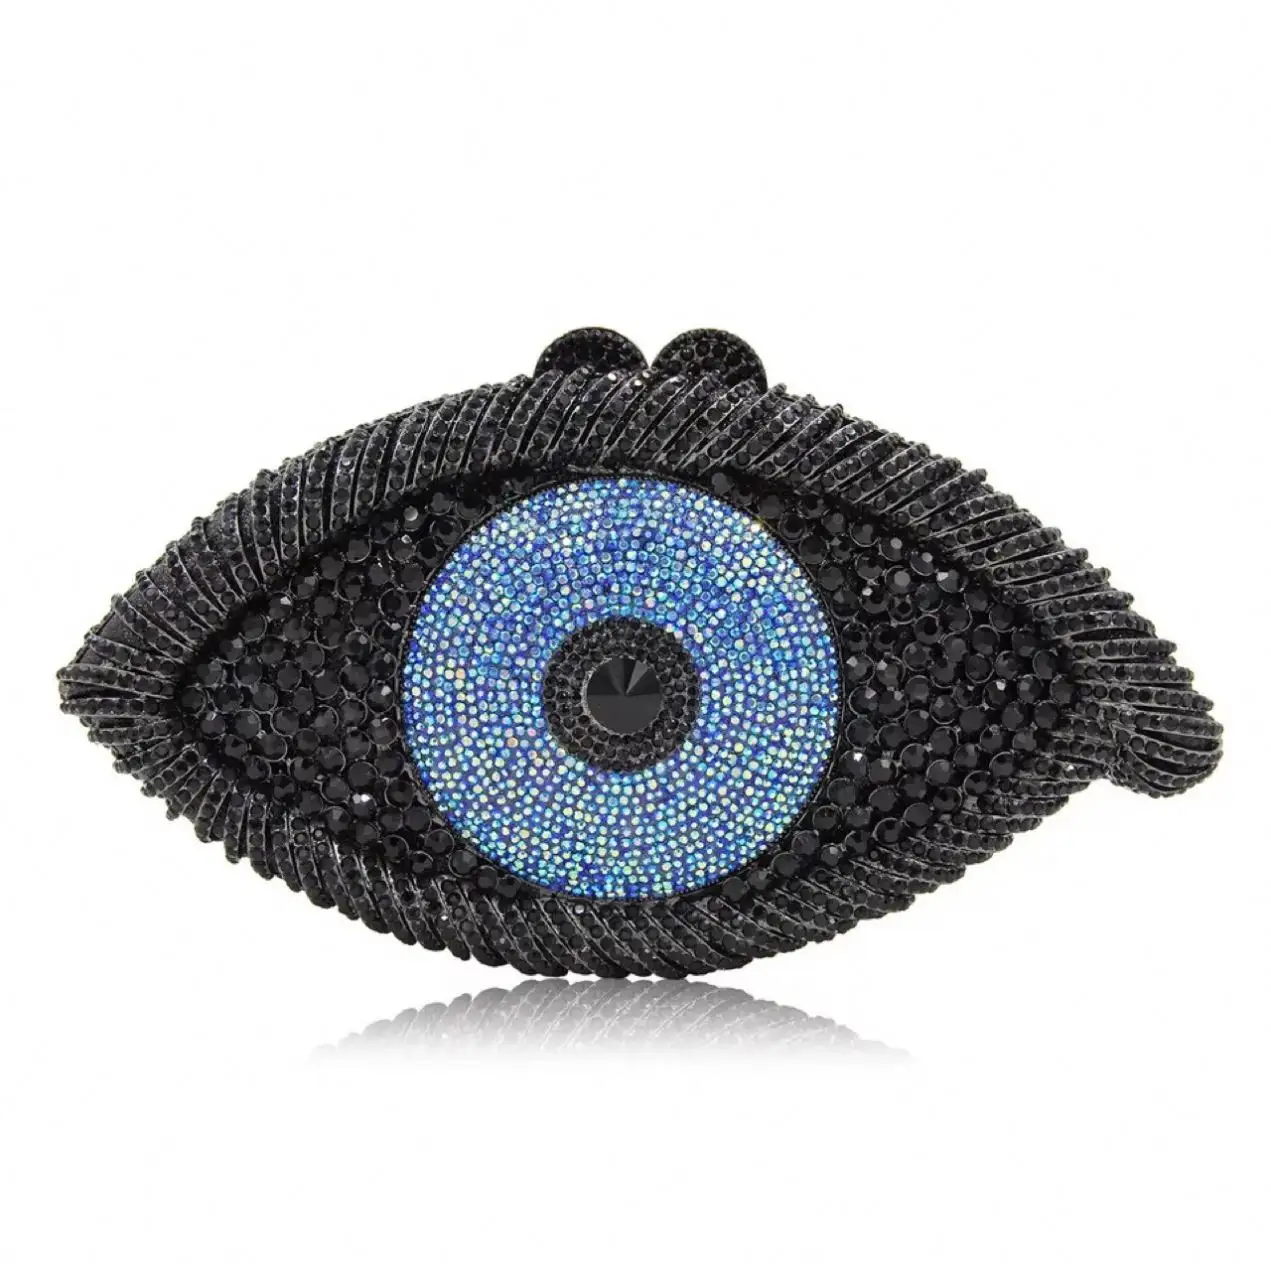 Ladies Party Purses And Handbags Women Luxury Diamond Evening Bag And Clutches Evil Eye Glitter Rhinestone Crystal Clutch Bags